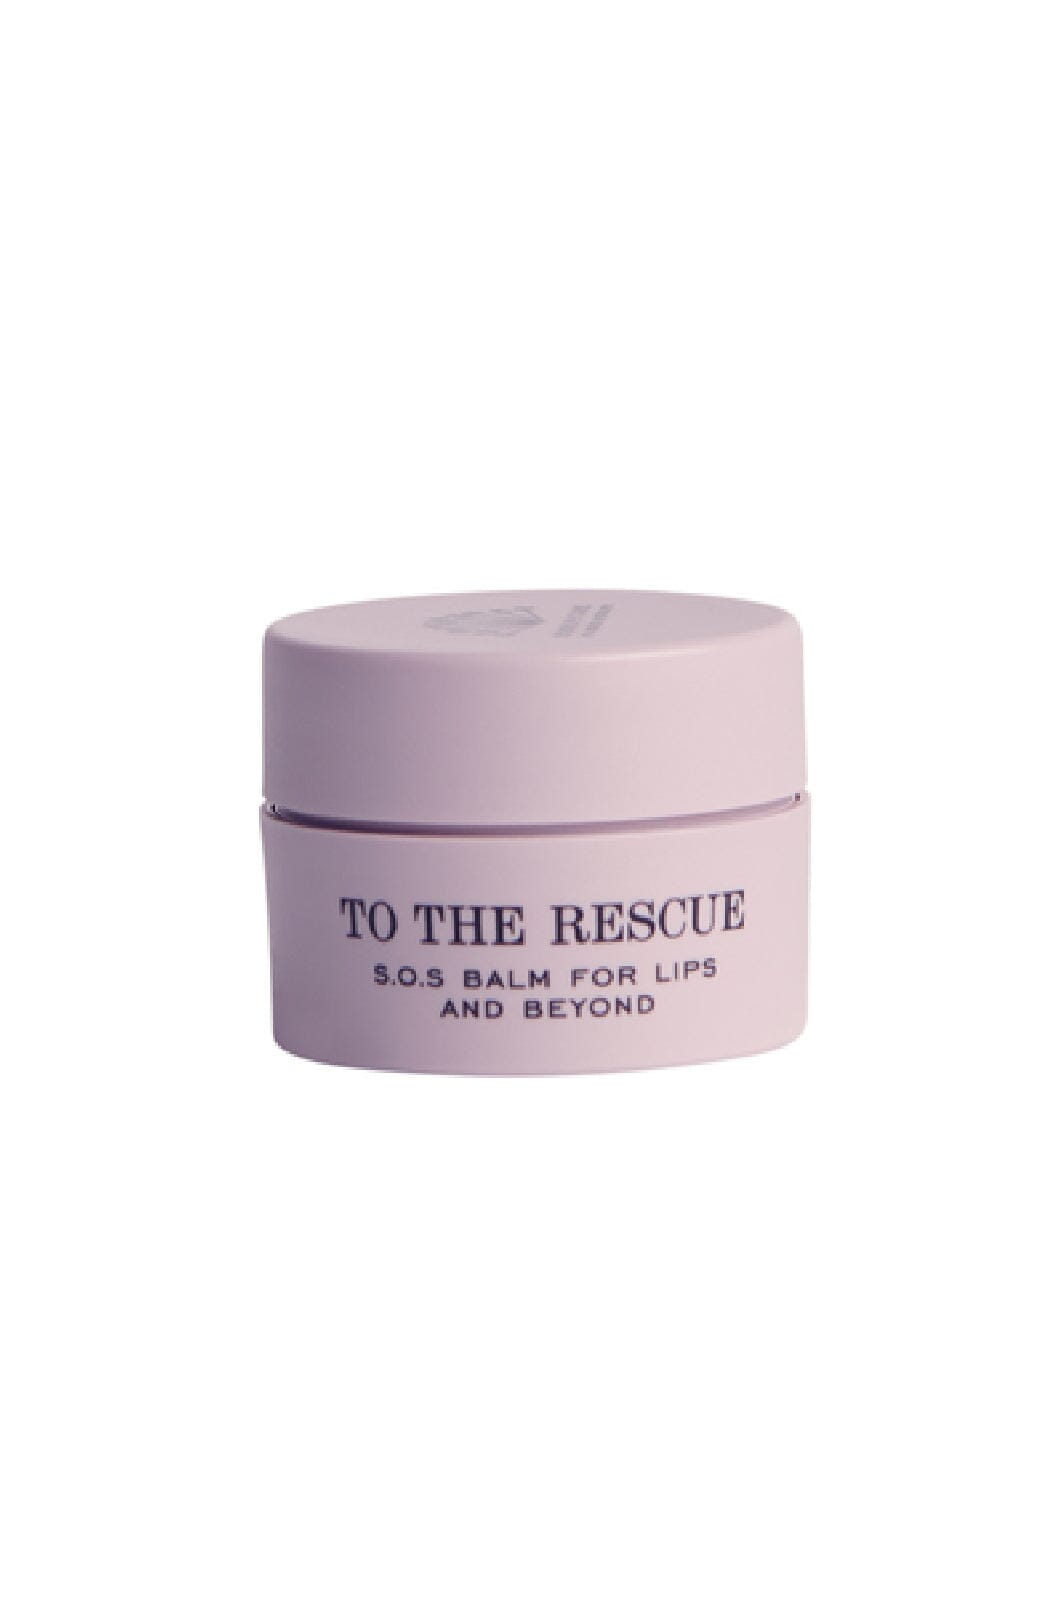 Rudolph Care - To the Rescue Balm Læbepleje 